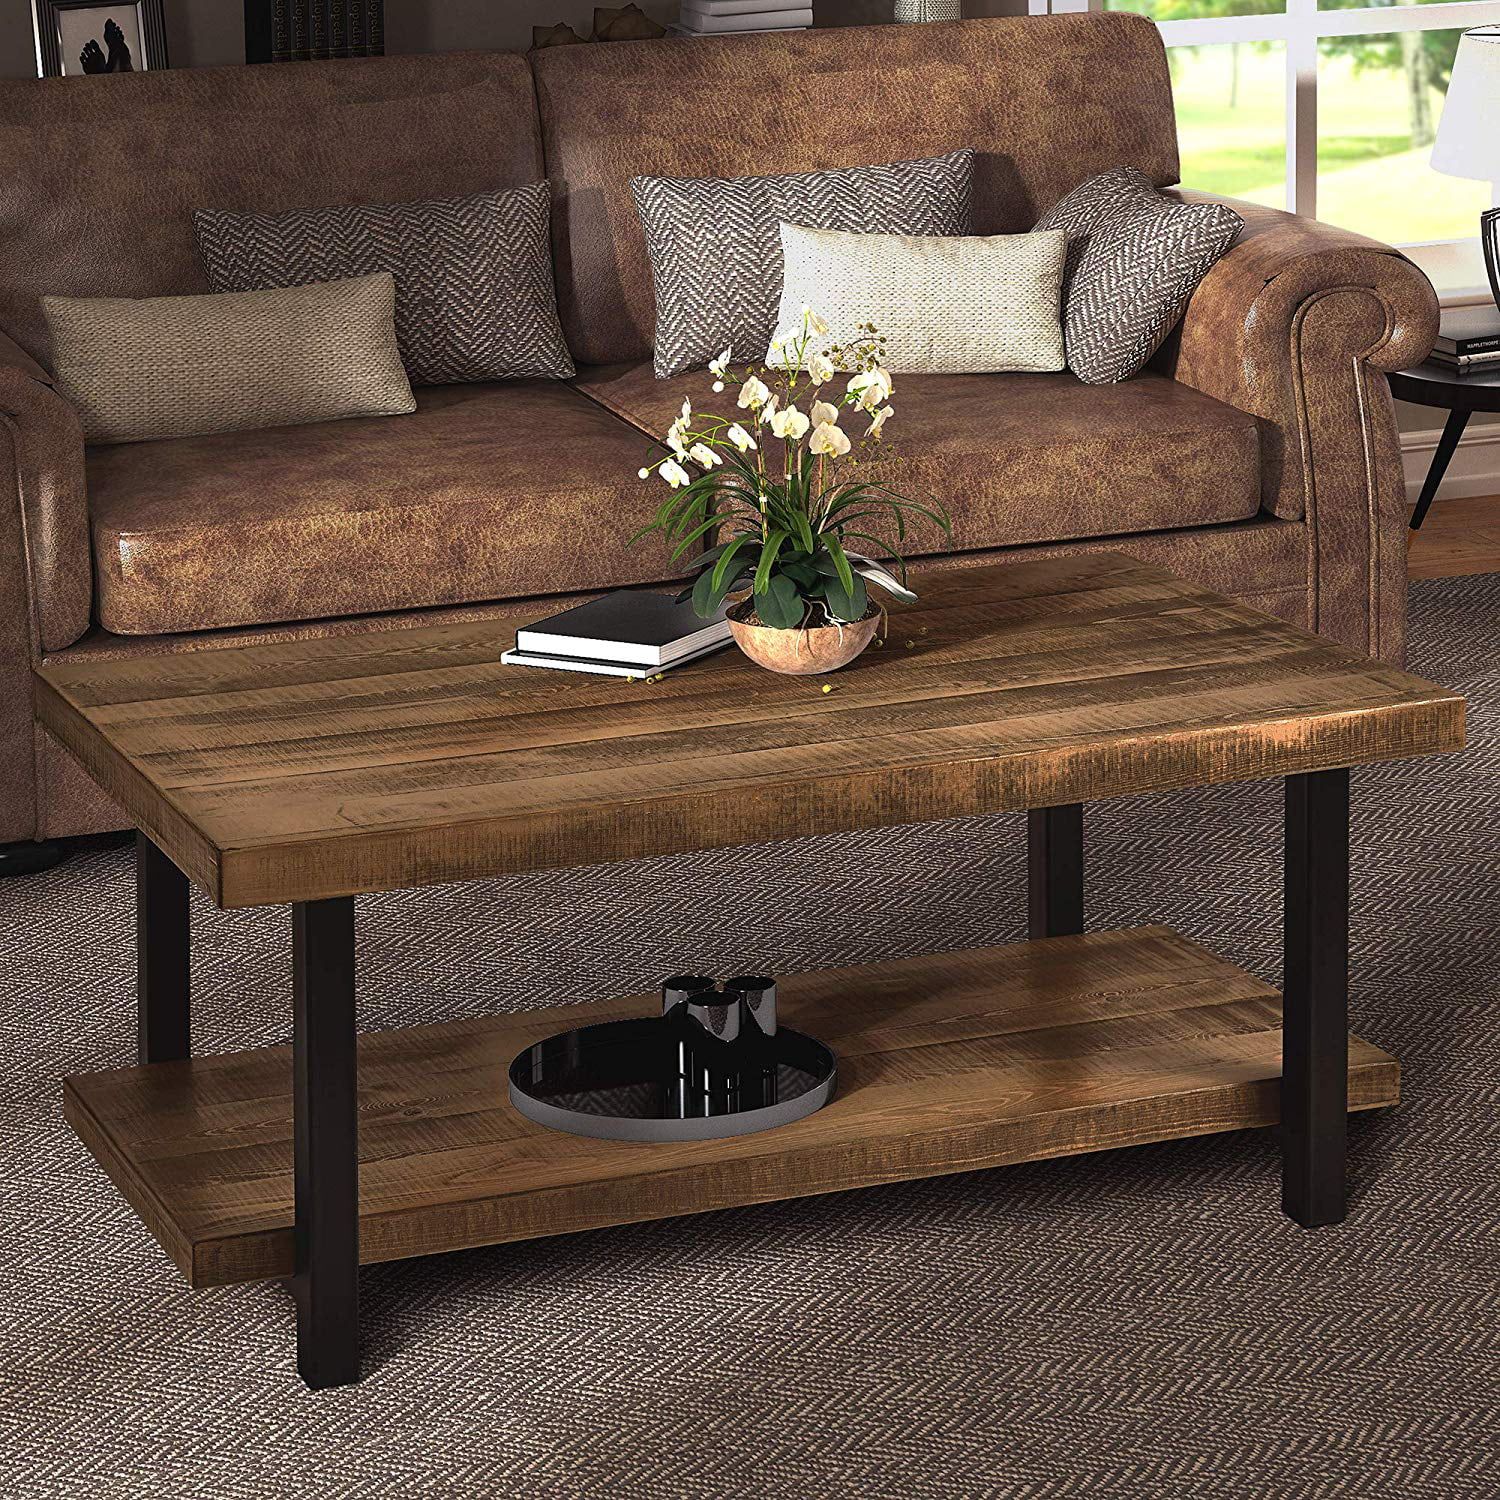 Harper&bright Designs Industrial Rectangular Pine Wood Coffee Table With Regard To Rustic Coffee Tables (View 10 of 20)